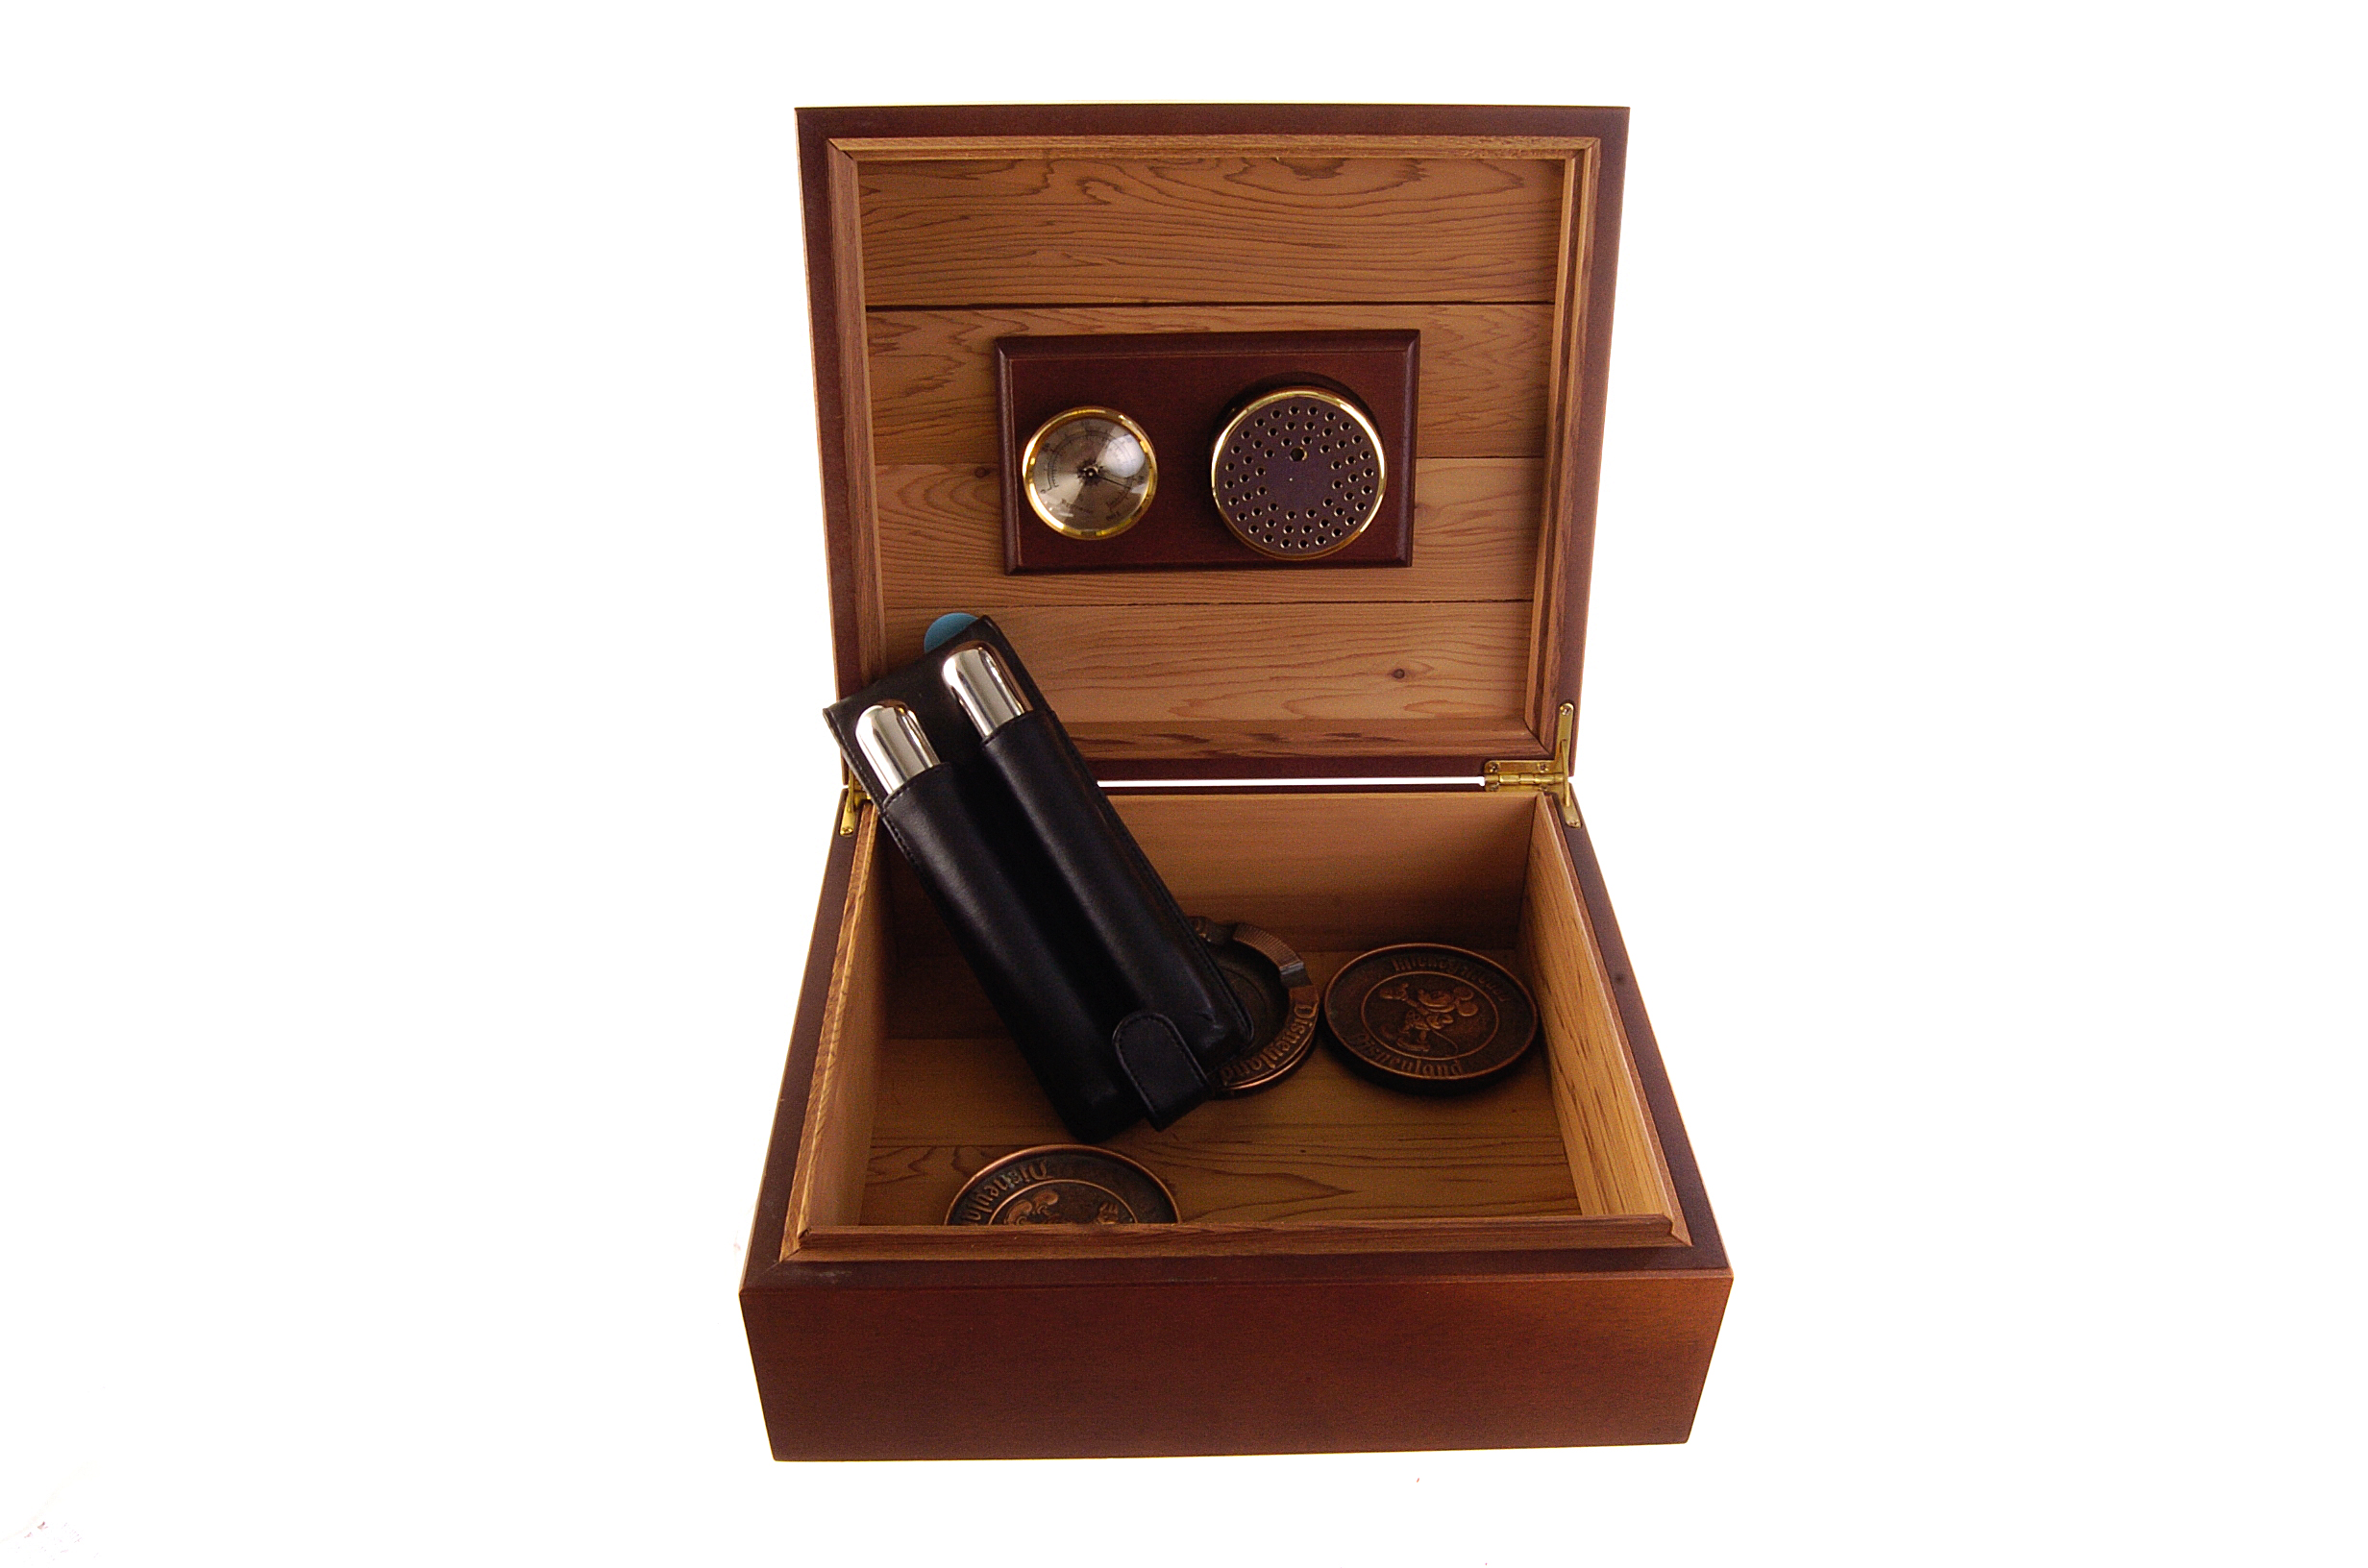 A humador cigar carrier, complete with two metal pocket cigar holders in leather case, plus three